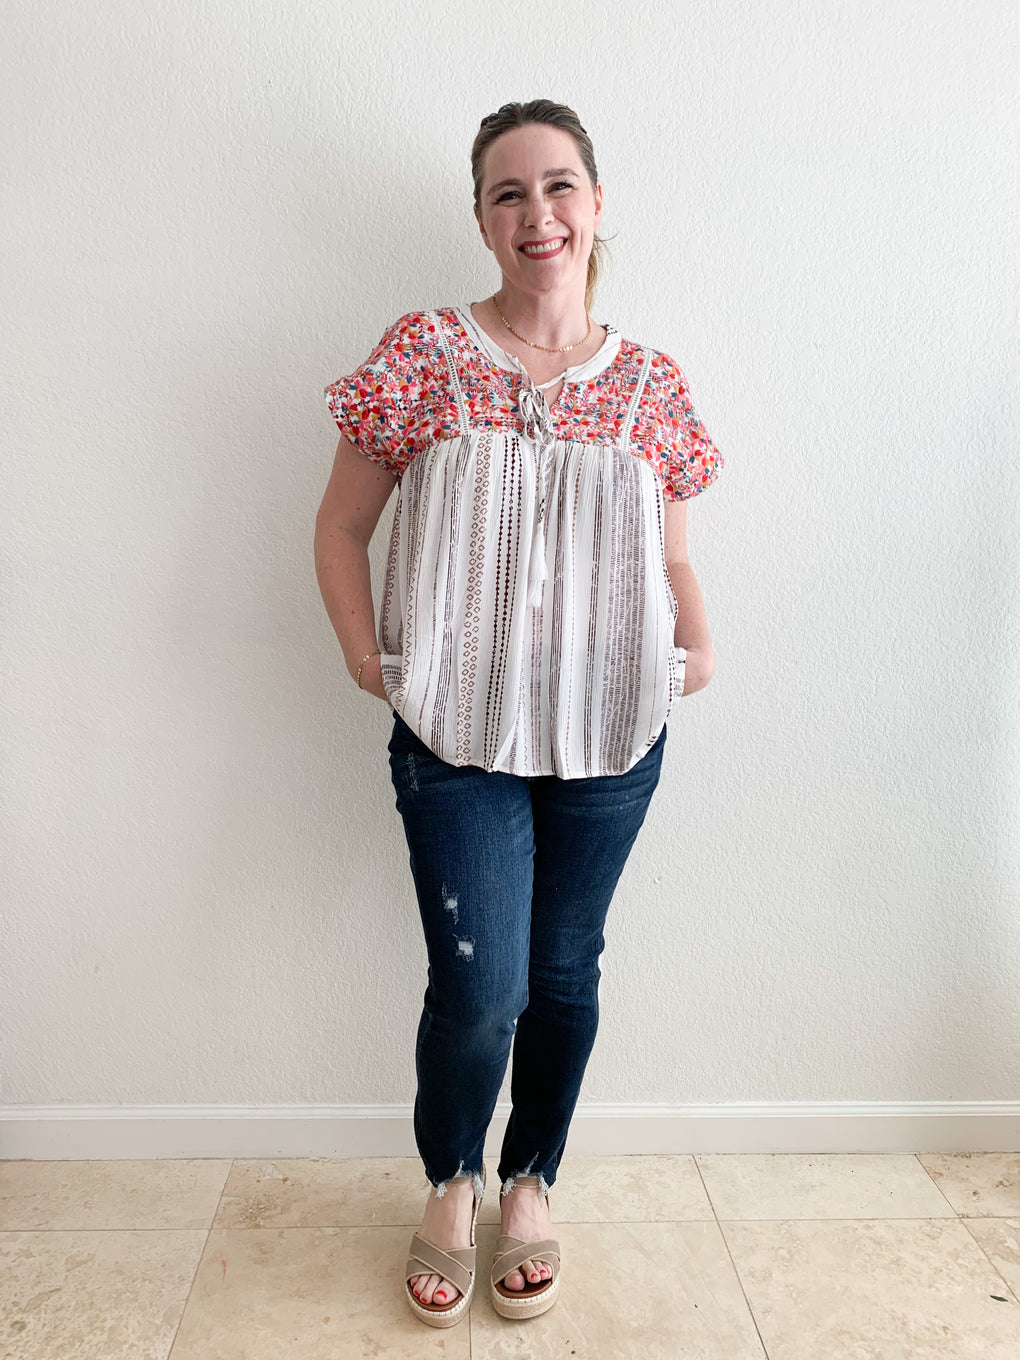 Smiling woman in front of white wall wearing flowy printed top and jeans.